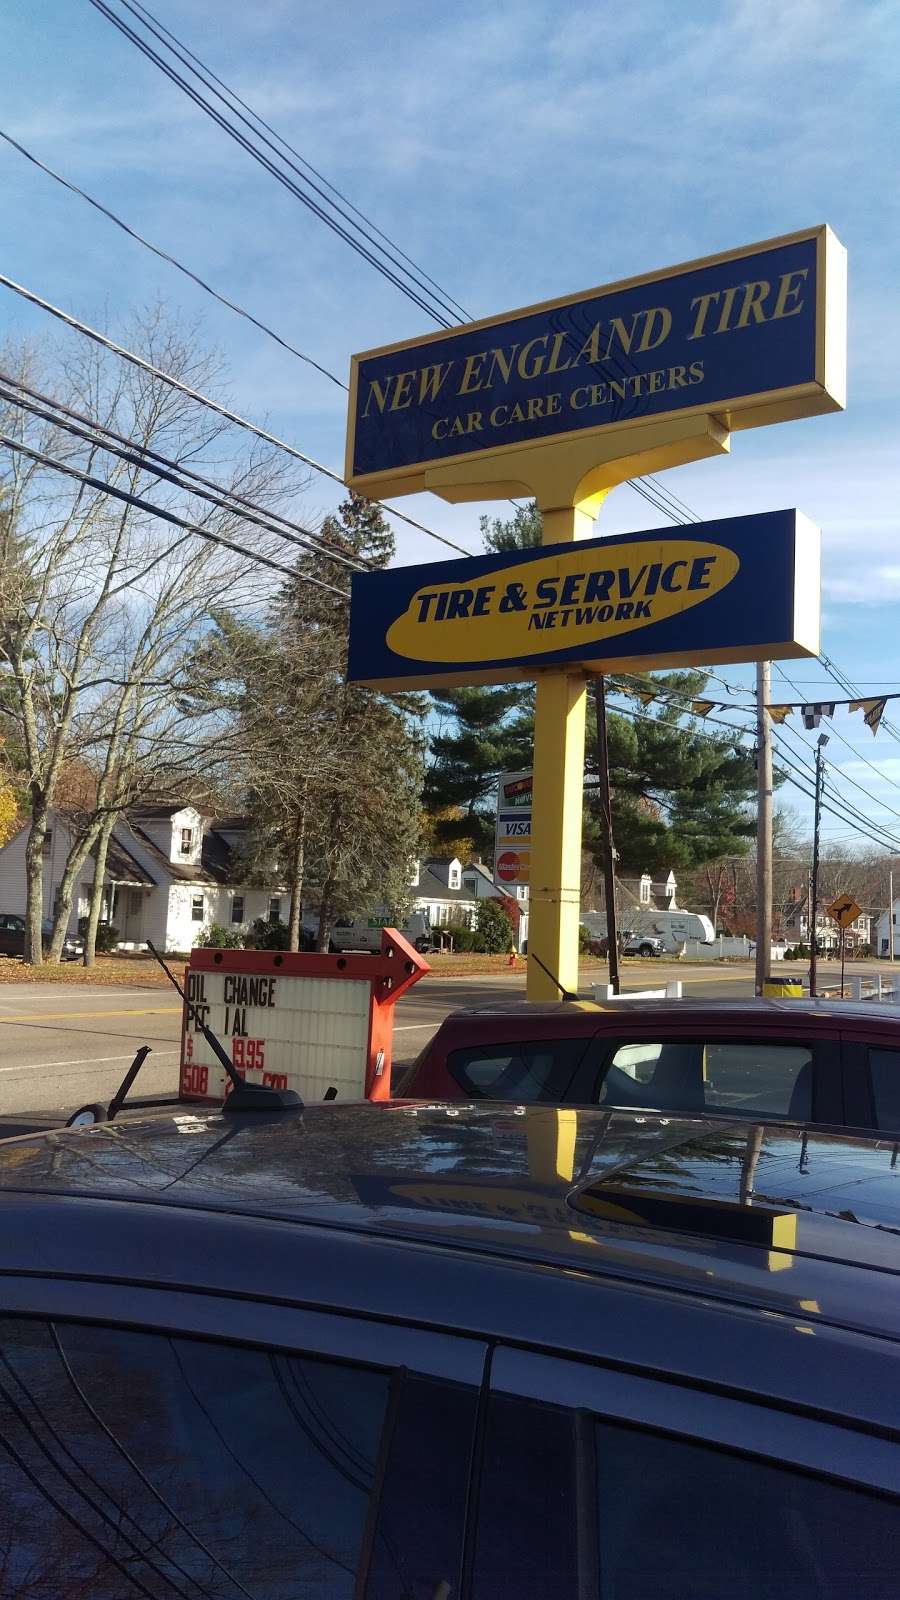 NEW ENGLAND TIRE Car Care Centers - Mansfield | 515 S Main St, Mansfield, MA 02048 | Phone: (508) 261-6100